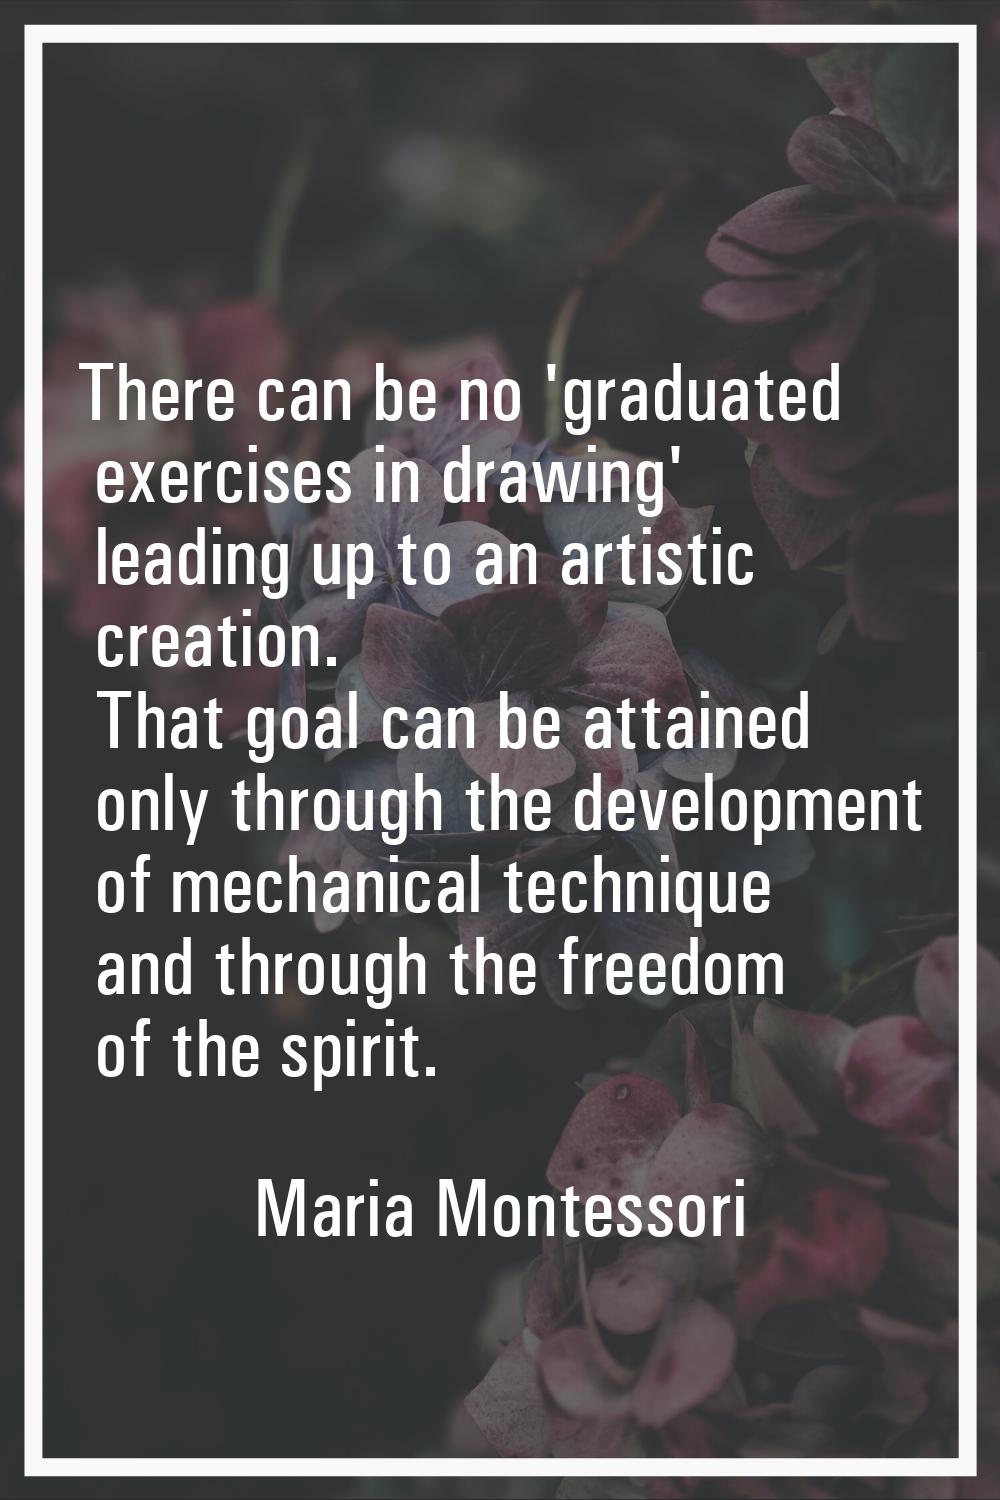 There can be no 'graduated exercises in drawing' leading up to an artistic creation. That goal can 